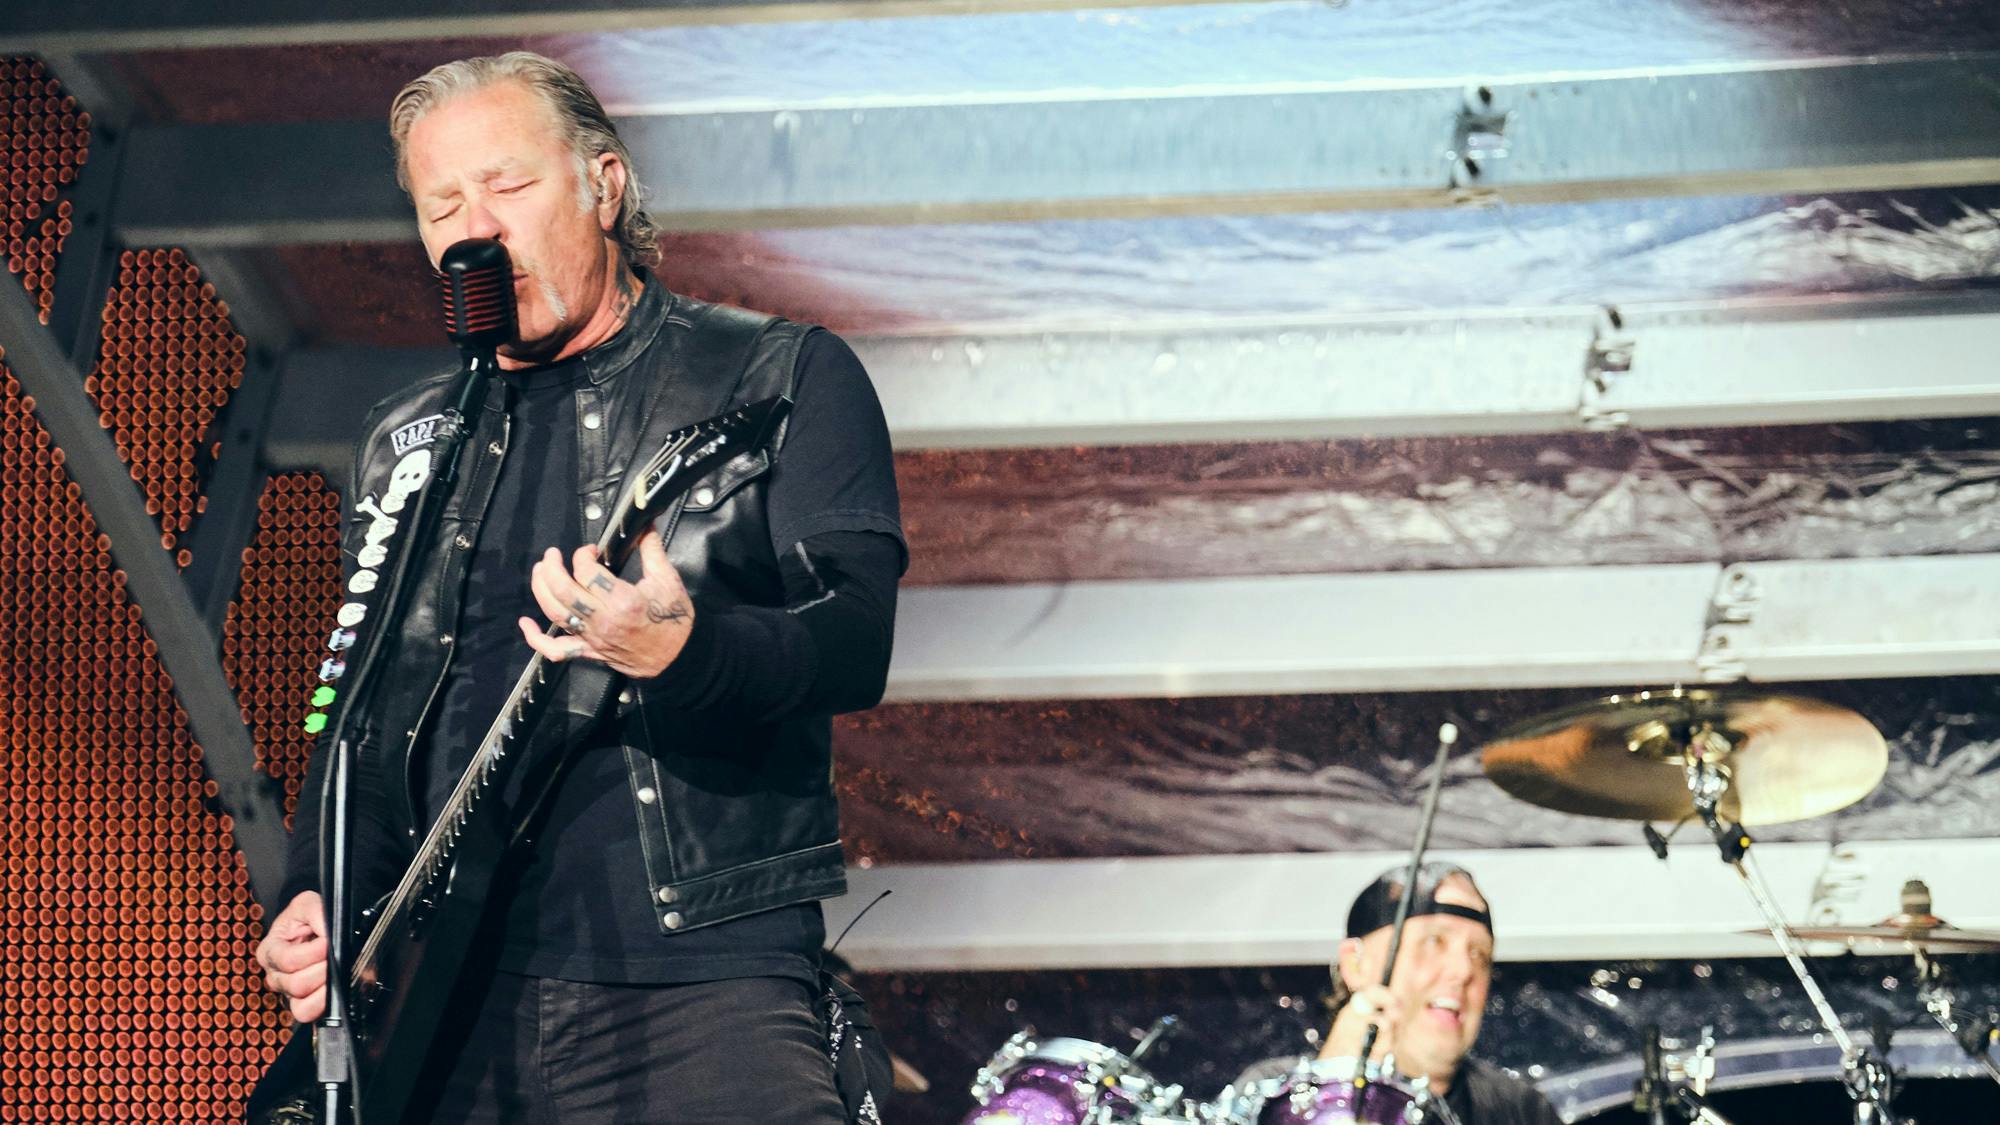 James Hetfield reflects on Metallica originally wanting a different vocalist: "It didn't work out"